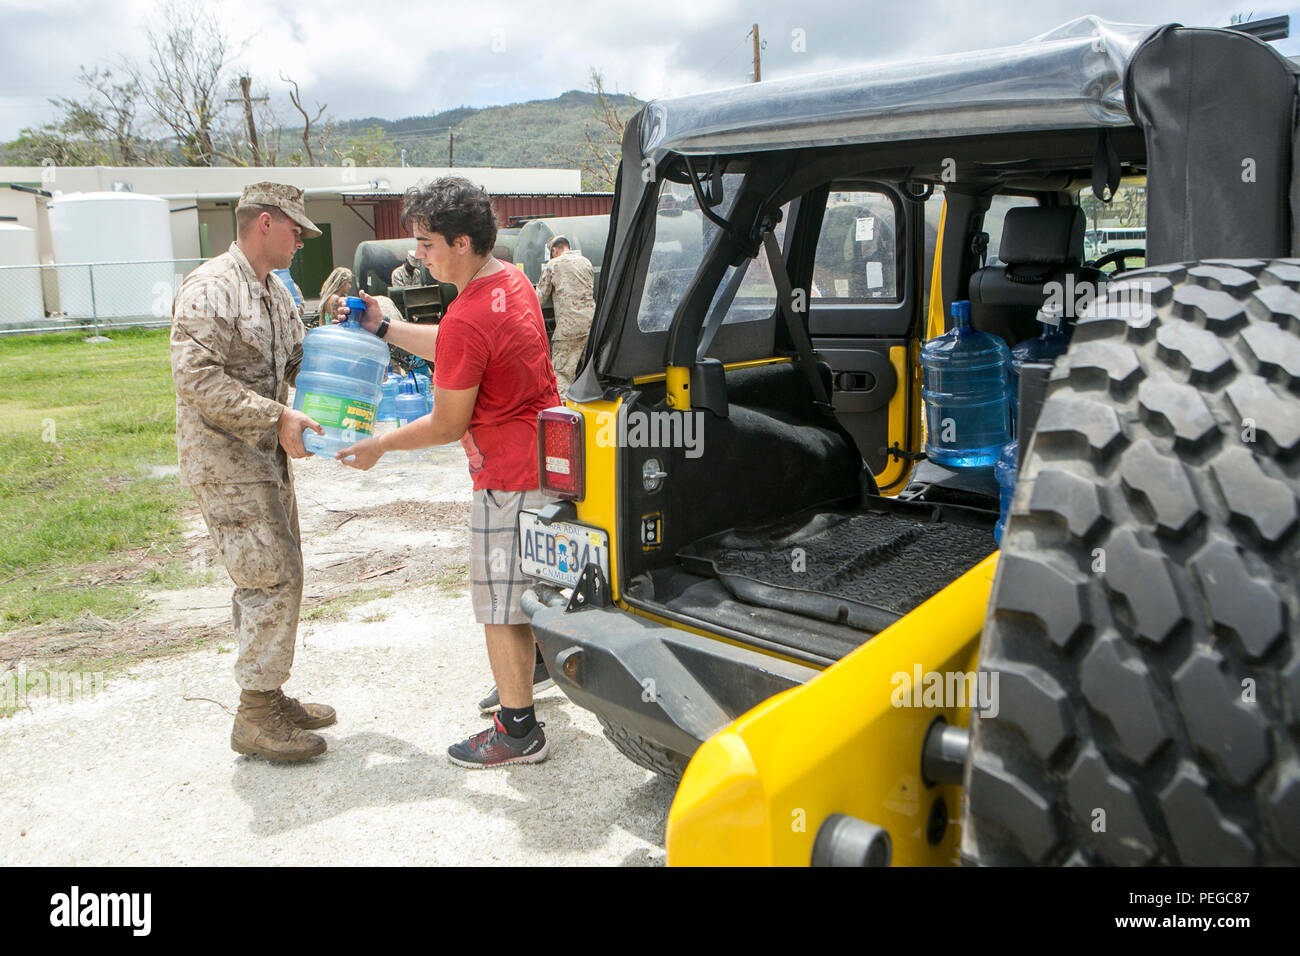 U.S. Marine Cpl. Harley Santic, with Combat Logistics Battalion 31, 31st Marine Expeditionary Unit, helps a civilian carry water to his vehicle as part of typhoon relief efforts in Saipan, Aug. 11, 2015. The 31st MEU and the ships of the Bonhomme Richard Amphibious Ready Group are assisting the Federal Emergency Management Agency with distributing emergency relief supplies to Saipan after the island was struck by Typhoon Soudelor, Aug. 2-3. (U.S. Marine Corps photo by Lance Cpl. Brian Bekkala/Released.) Stock Photo